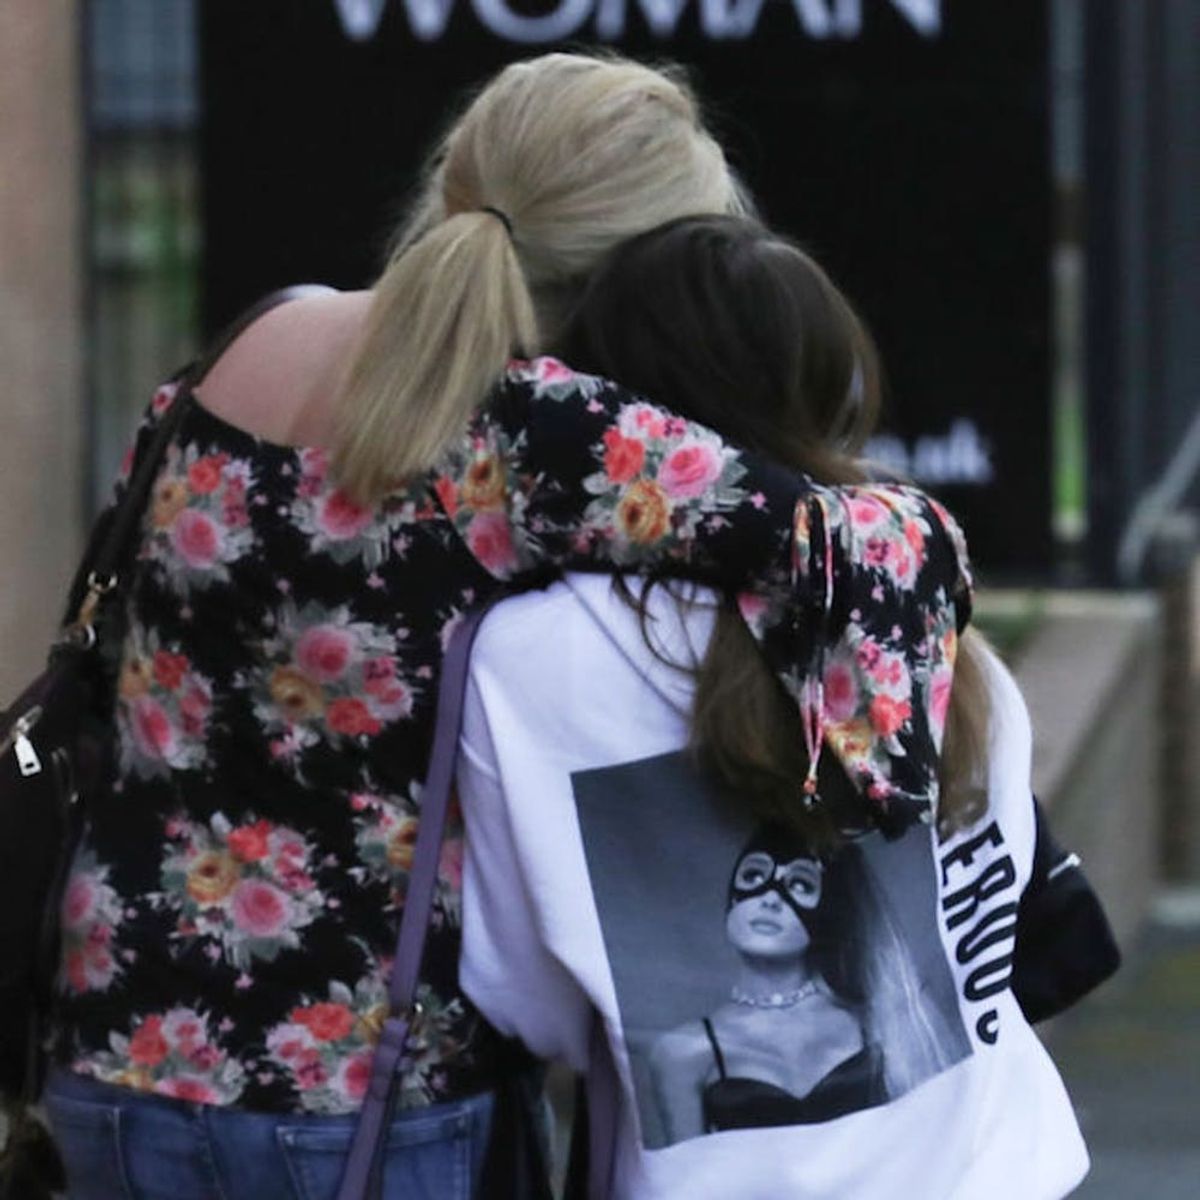 Morning Buzz: New Details Emerge in Ariana Grande Manchester Concert Explosion As Death Toll Rises + More